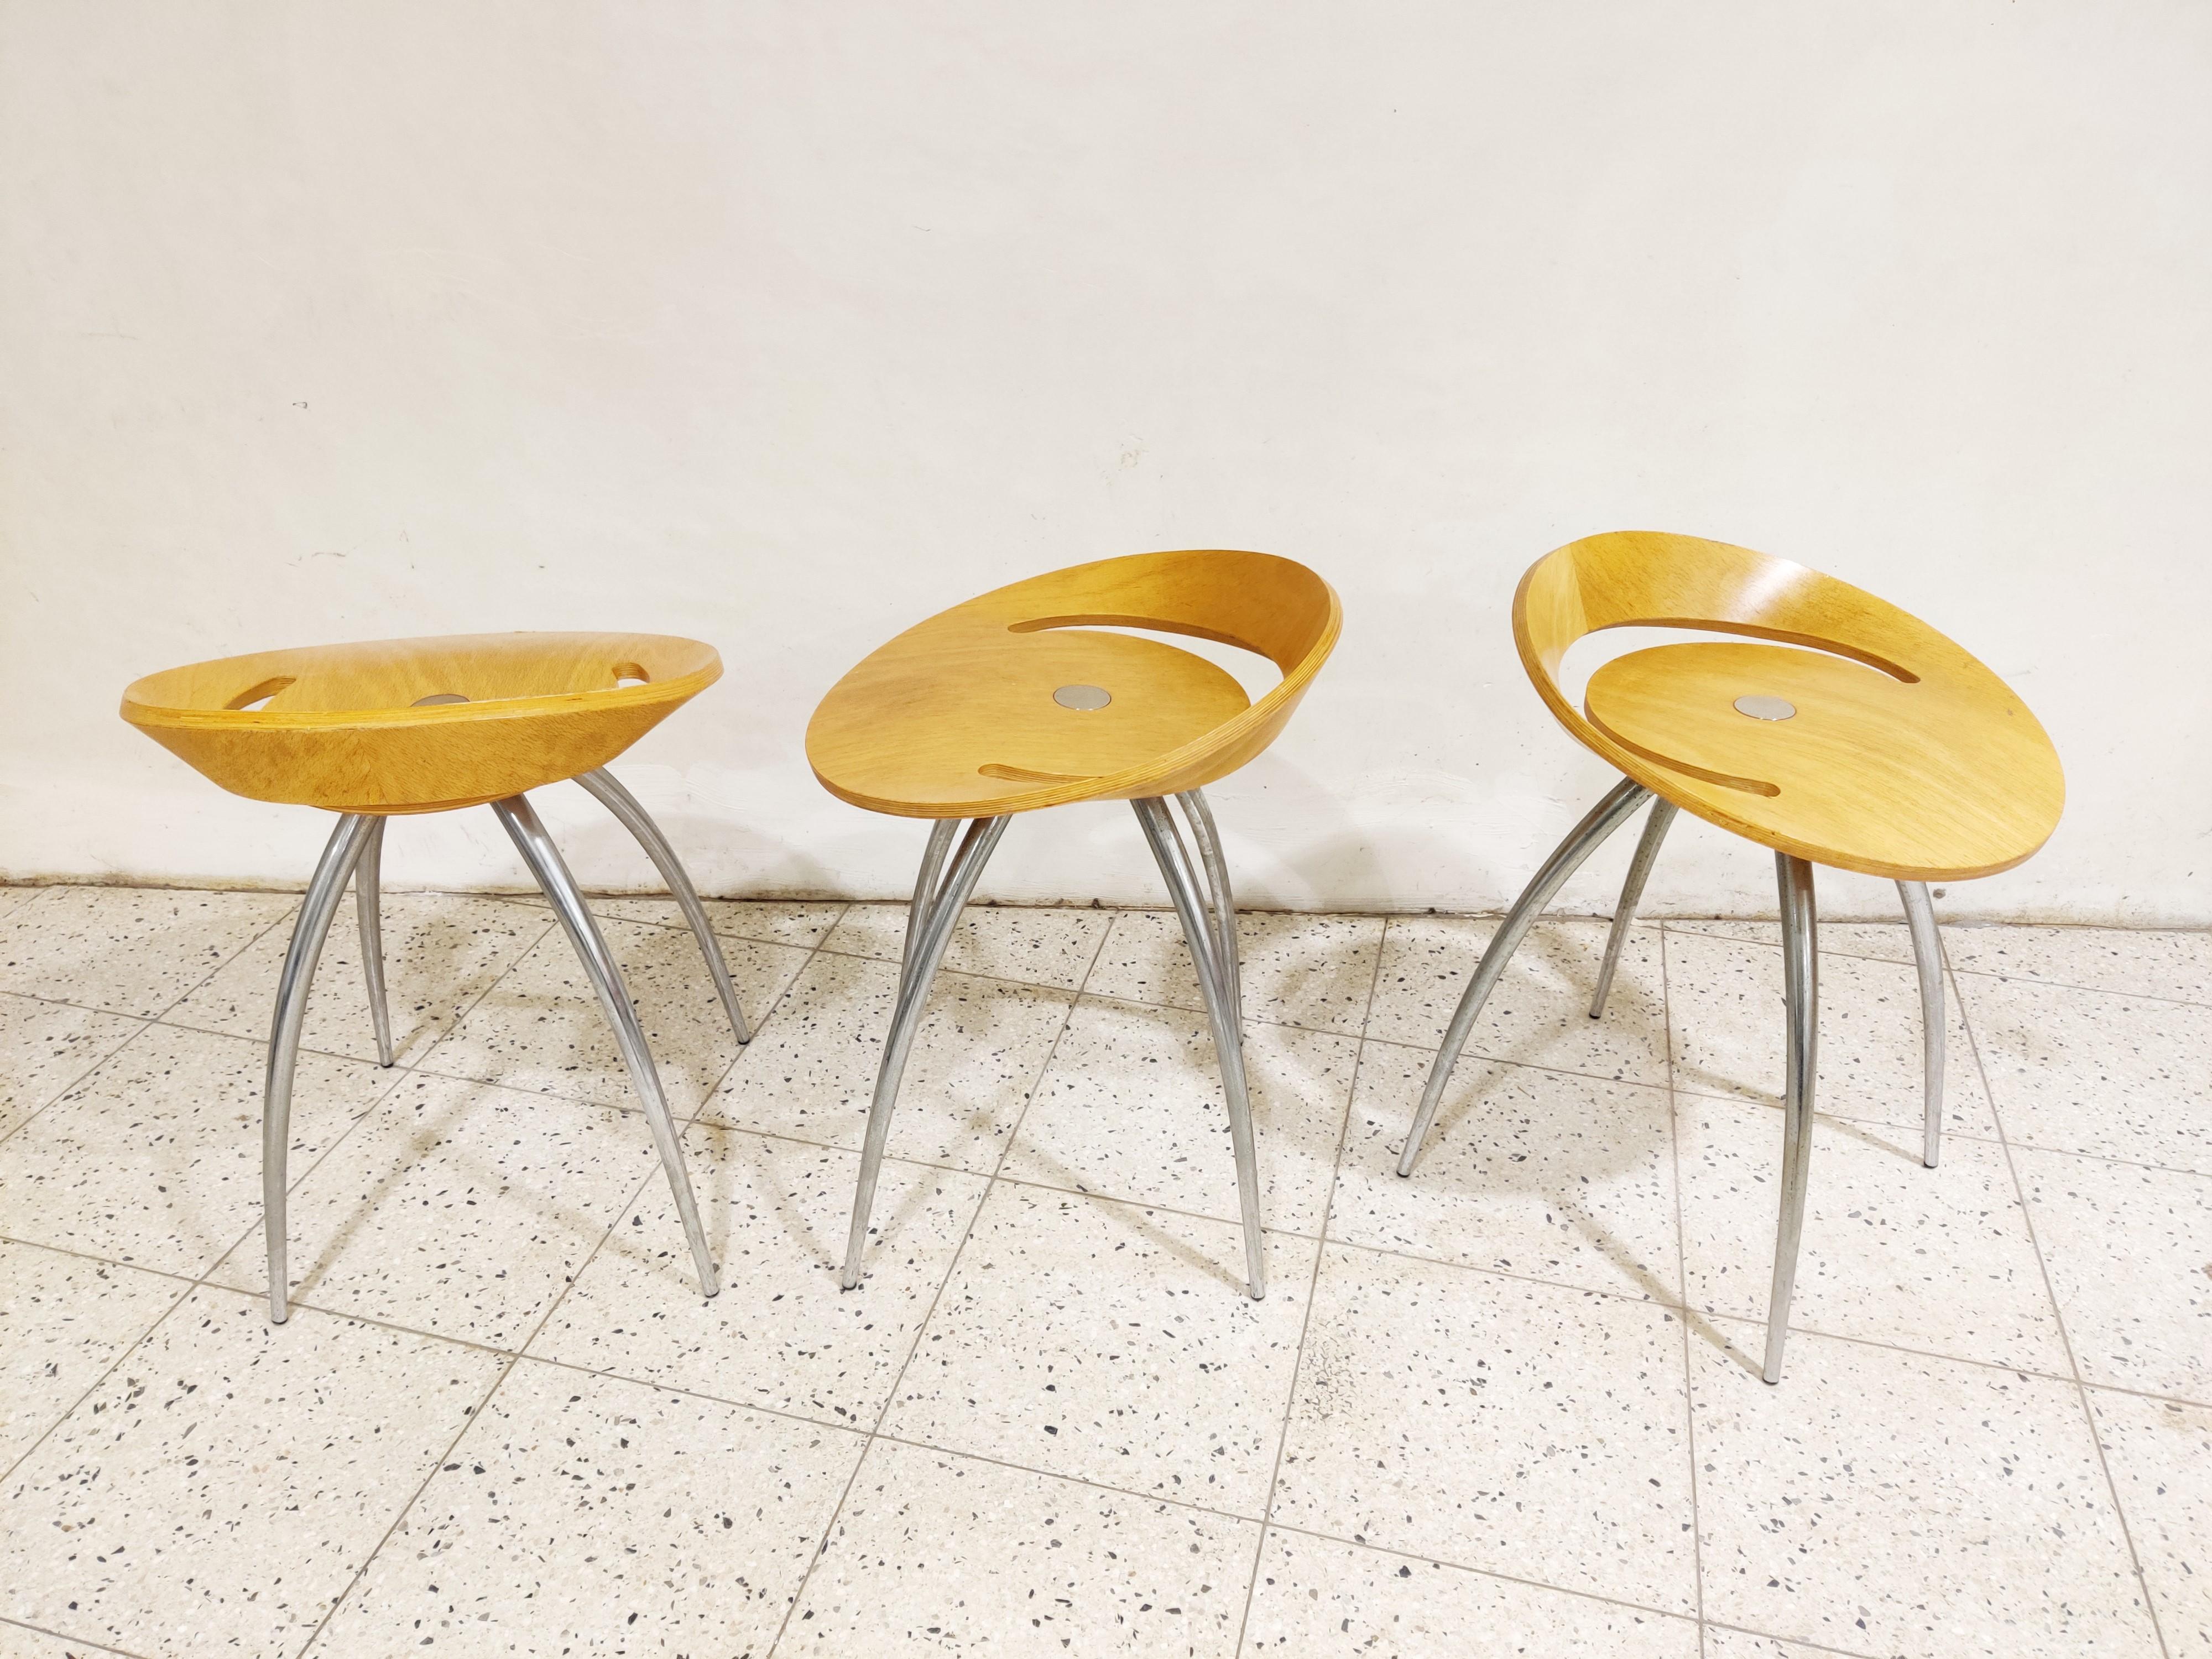 Beautifully designed plywood bar stools with chrome 'spider' shaped legs.

Timeless design.

The thick leather seats are attached with laces.

The open space in the stools allows to easily move them around.

Good condition, slight user